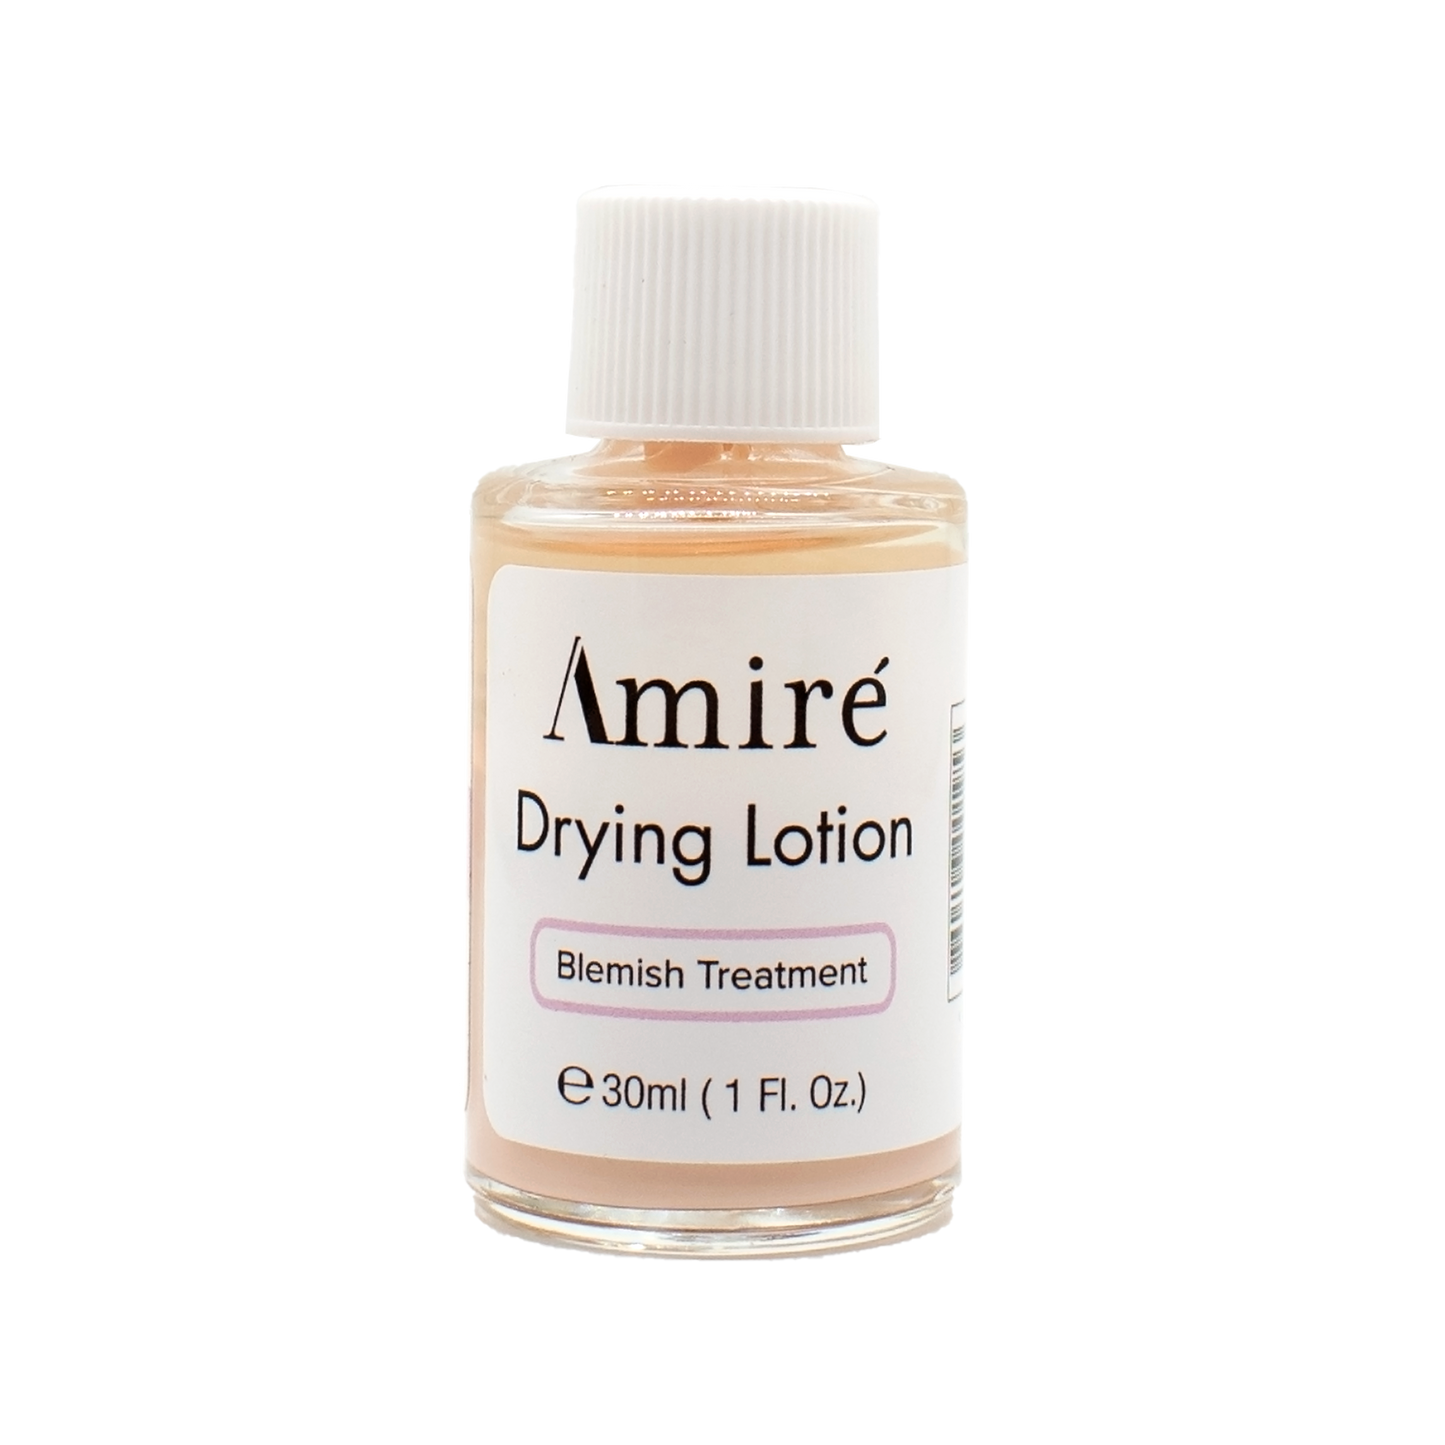 Acne Drying Lotion